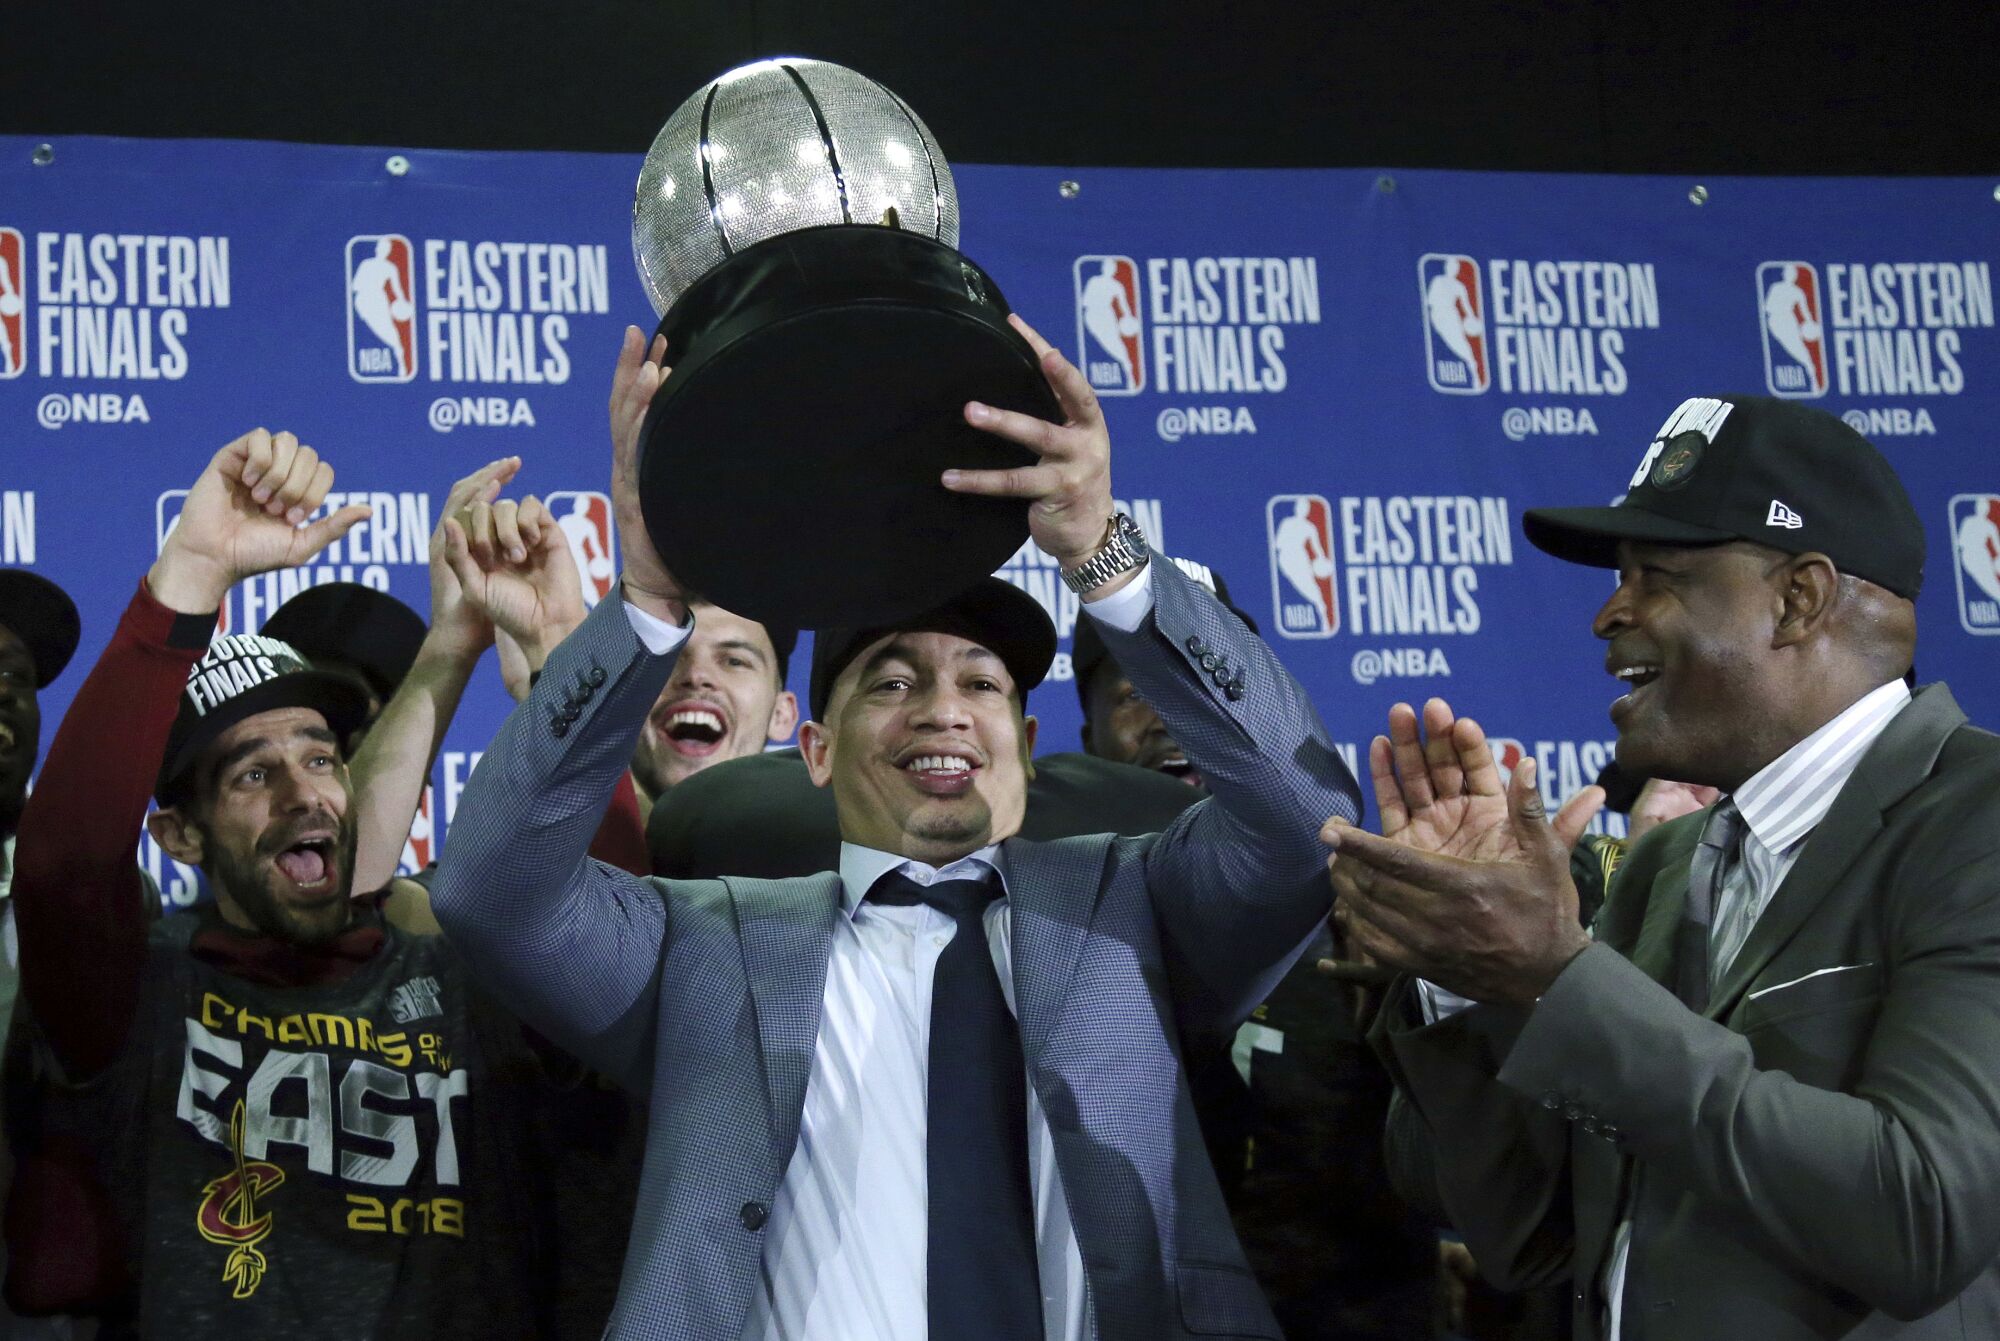 Tyronn Lue, with friend and assistant coach Larry Drew to his right, hoists Eastern Conference trophy after beating Boston.